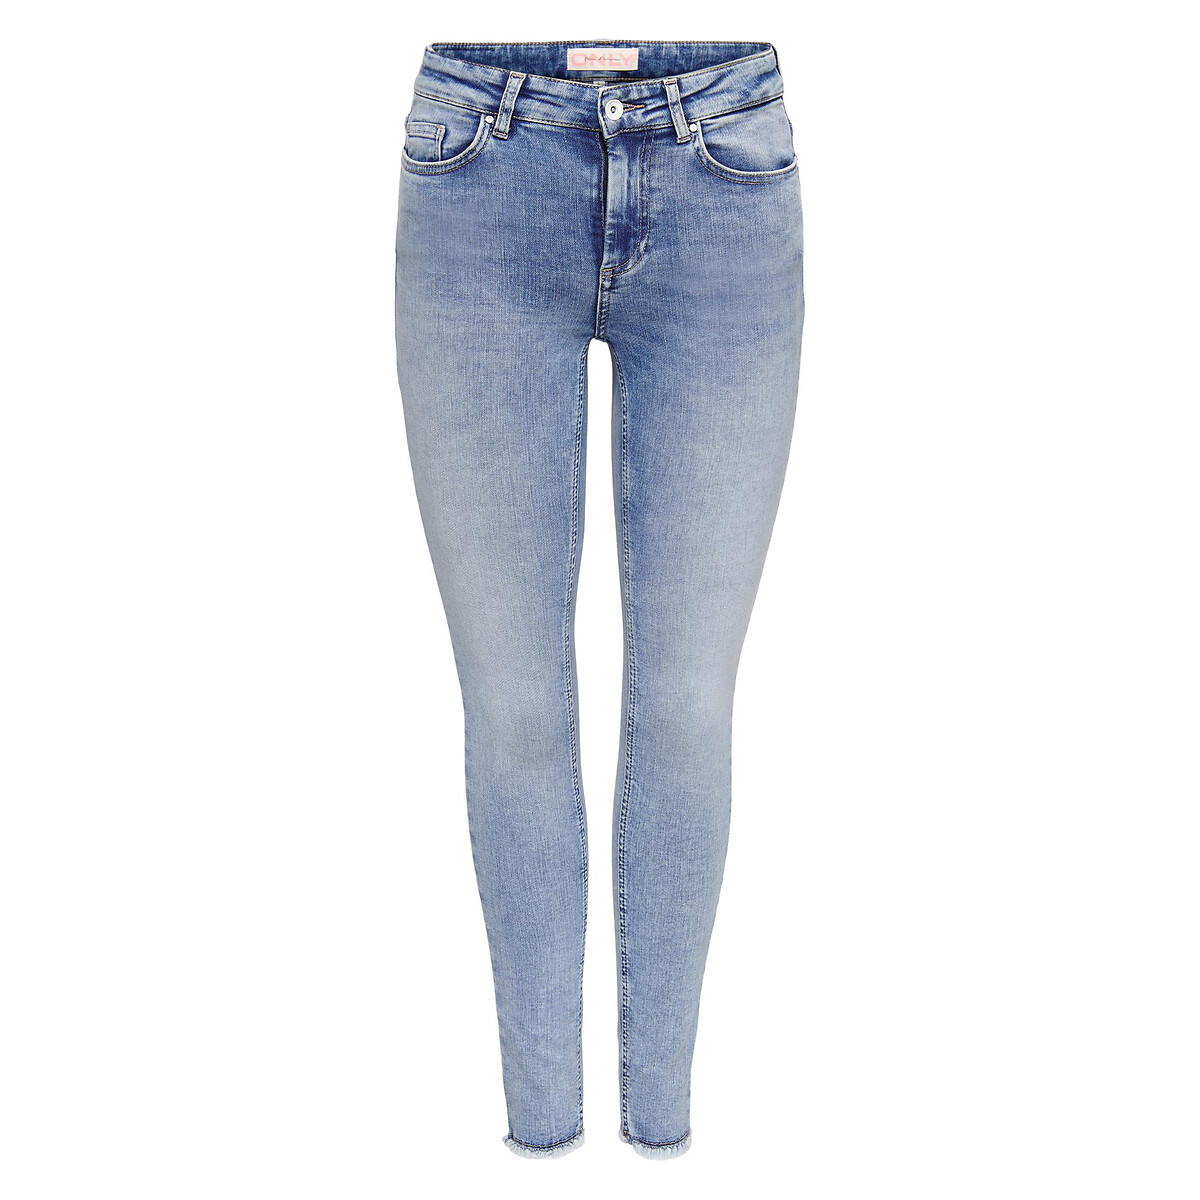 Image of Skinny Ankle Grazer Jeans in Mid Rise